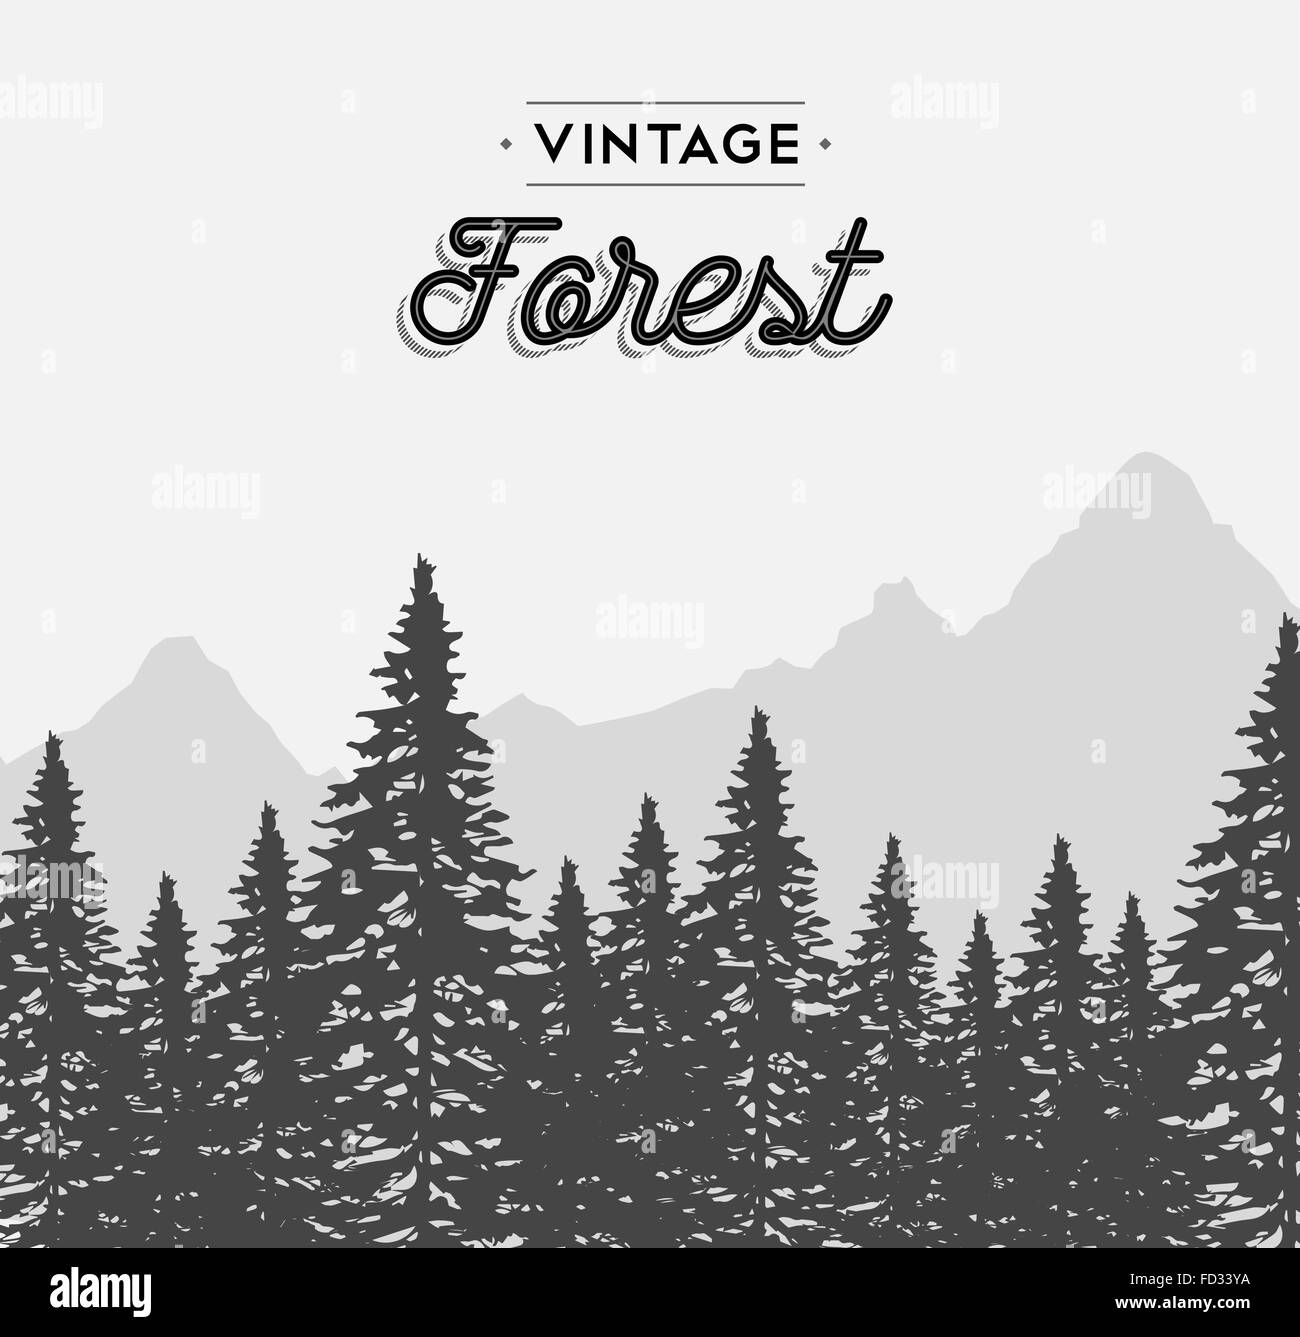 Vintage forest concept illustration with retro text label and winter tree landscape. EPS10 vector. Stock Vector